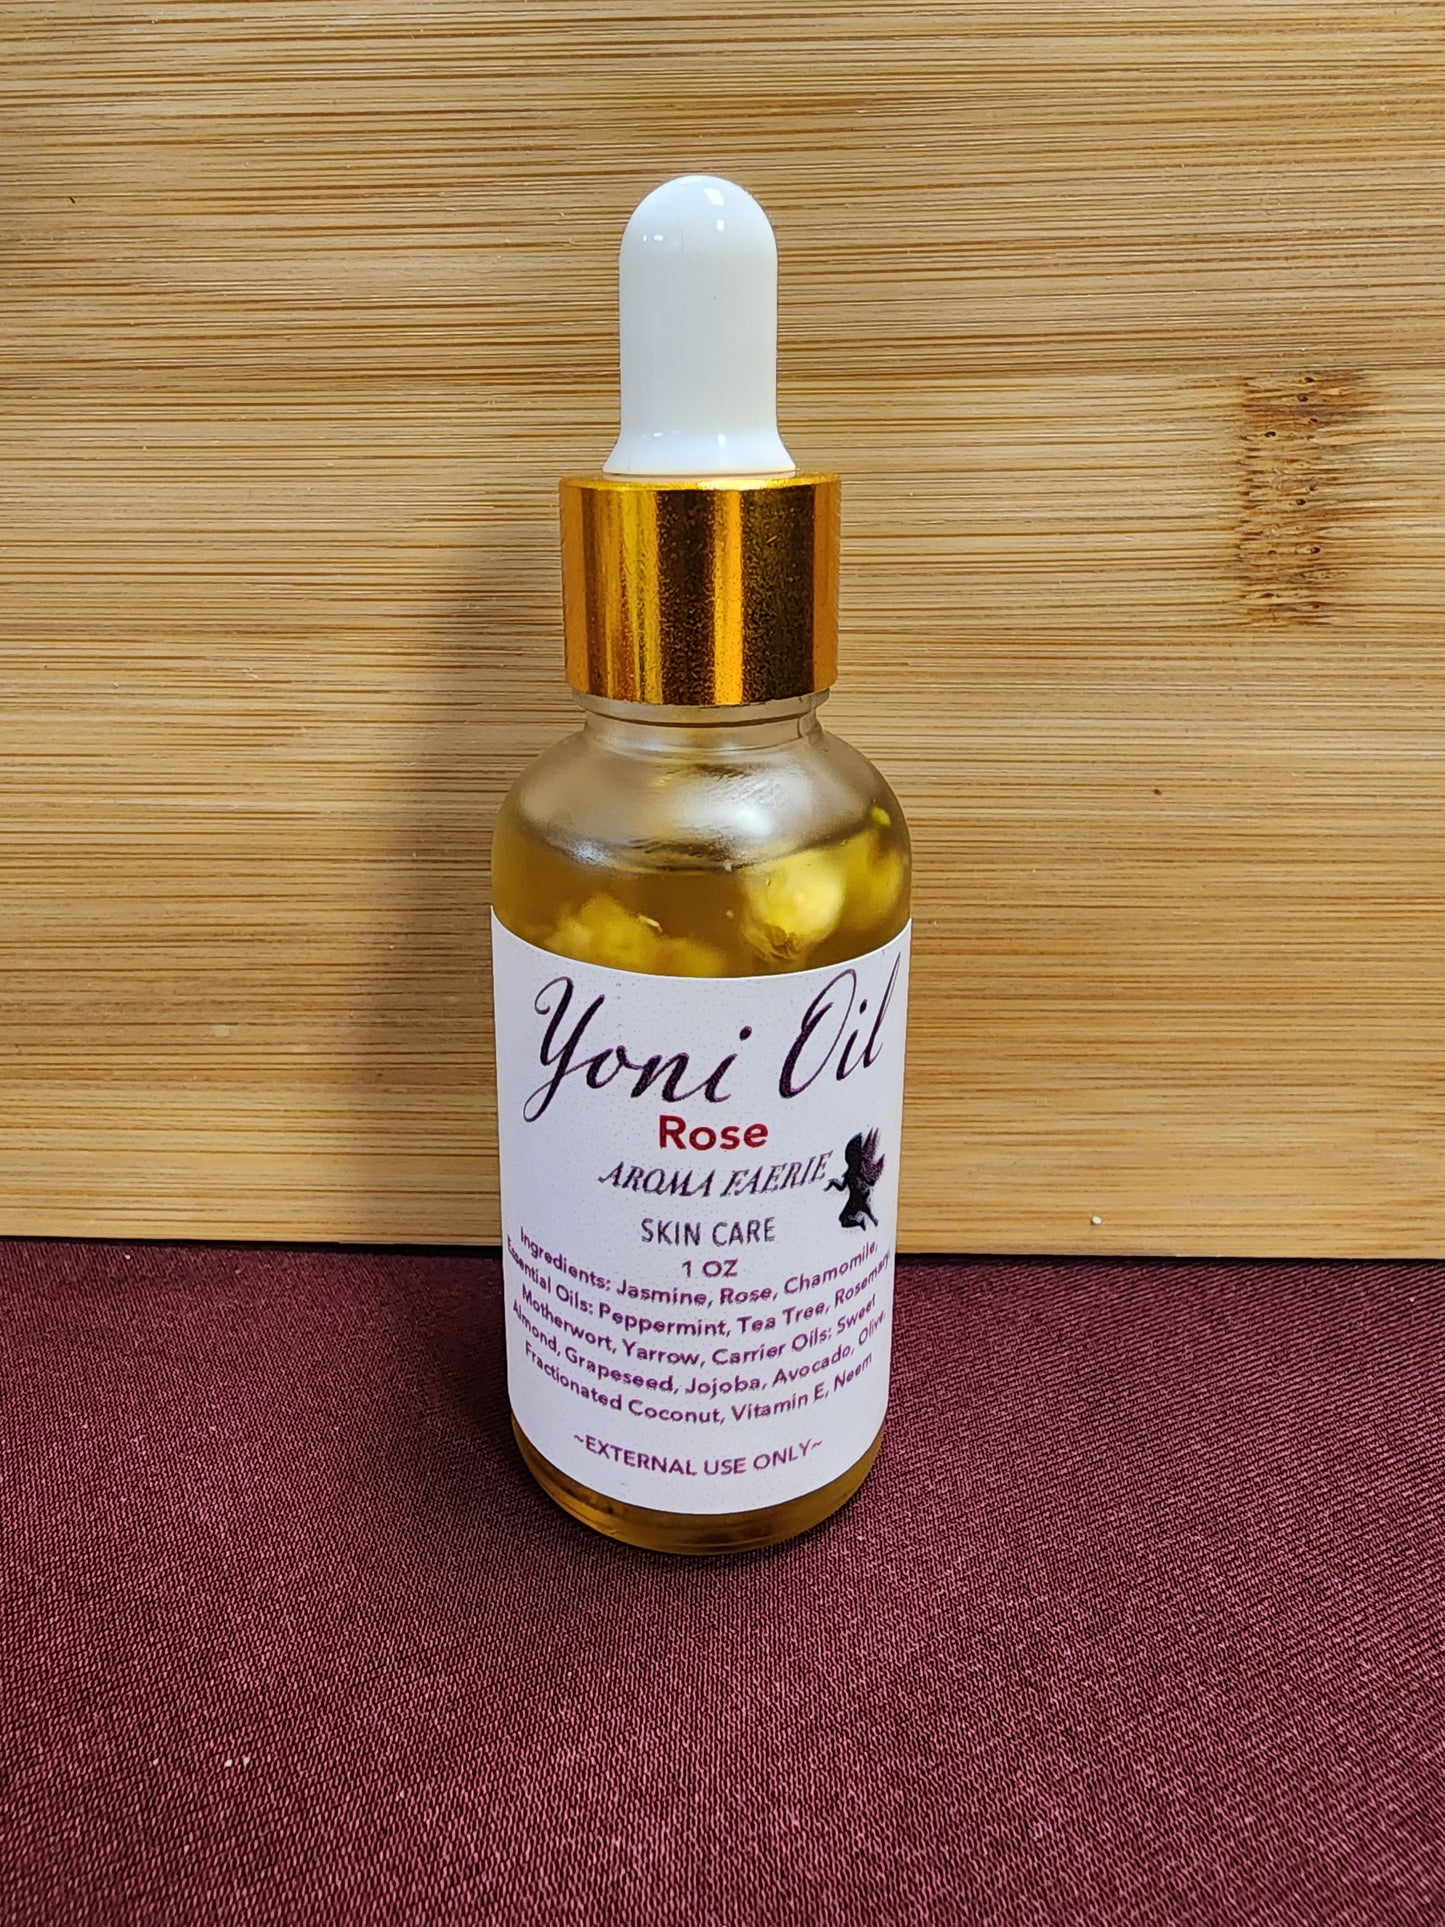 Yoni Oil Infused with Herbs